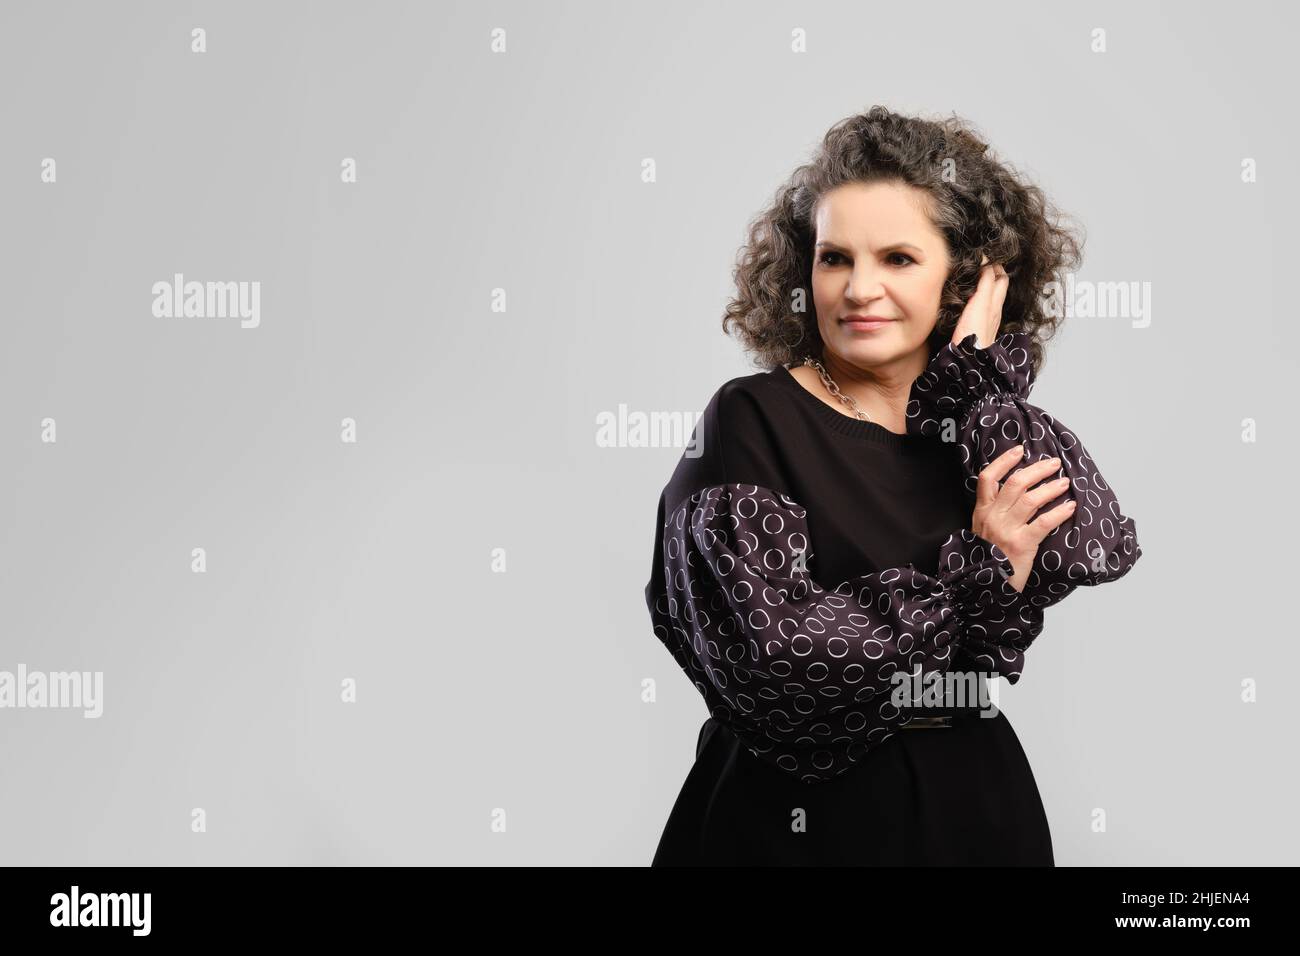 Senior woman touching lush curly hair in studio over grey background Stock Photo